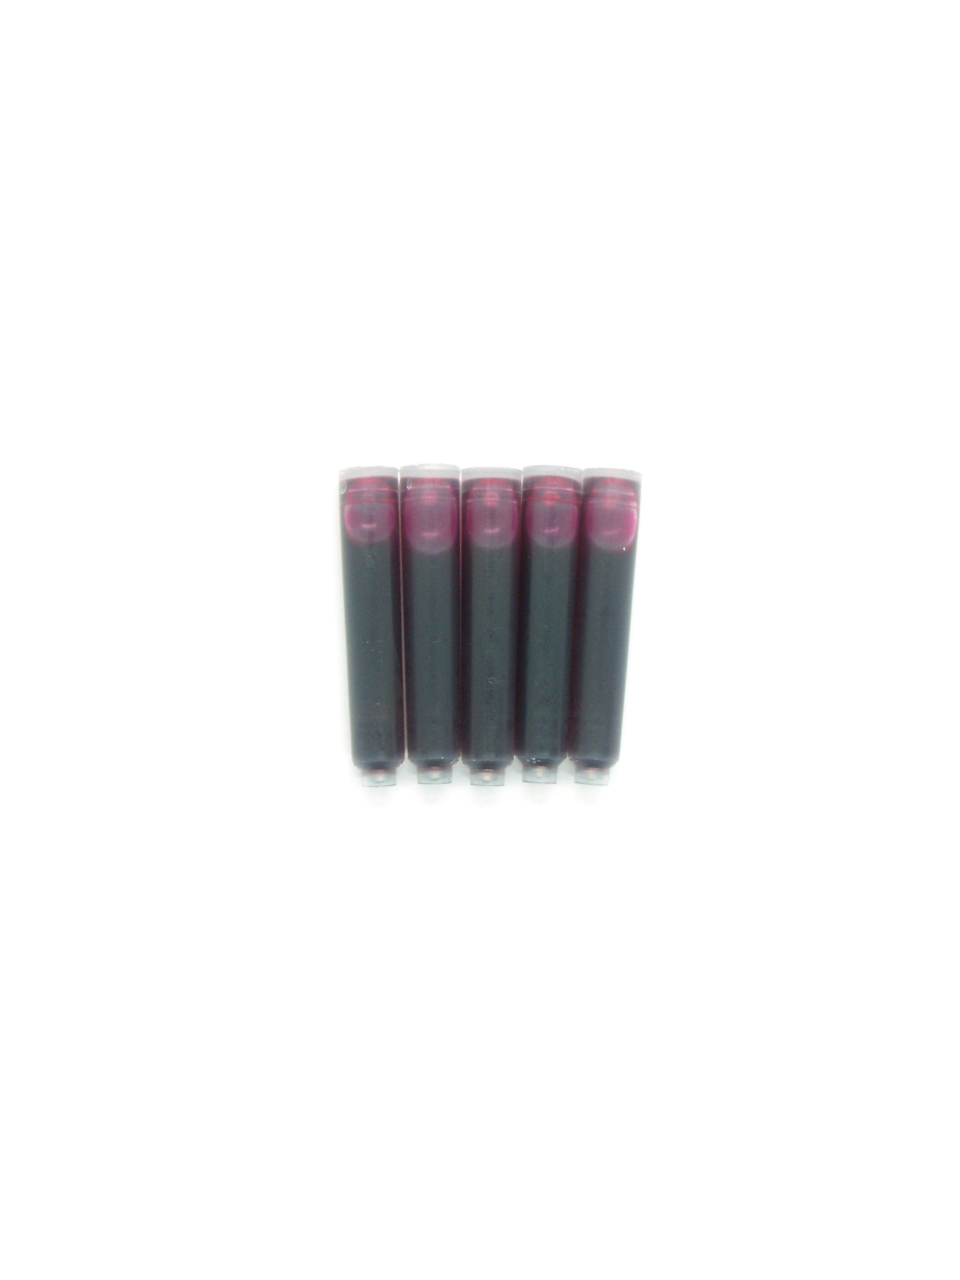 PenConverter Ink Cartridges For Dunhill Fountain Pens (Pink)